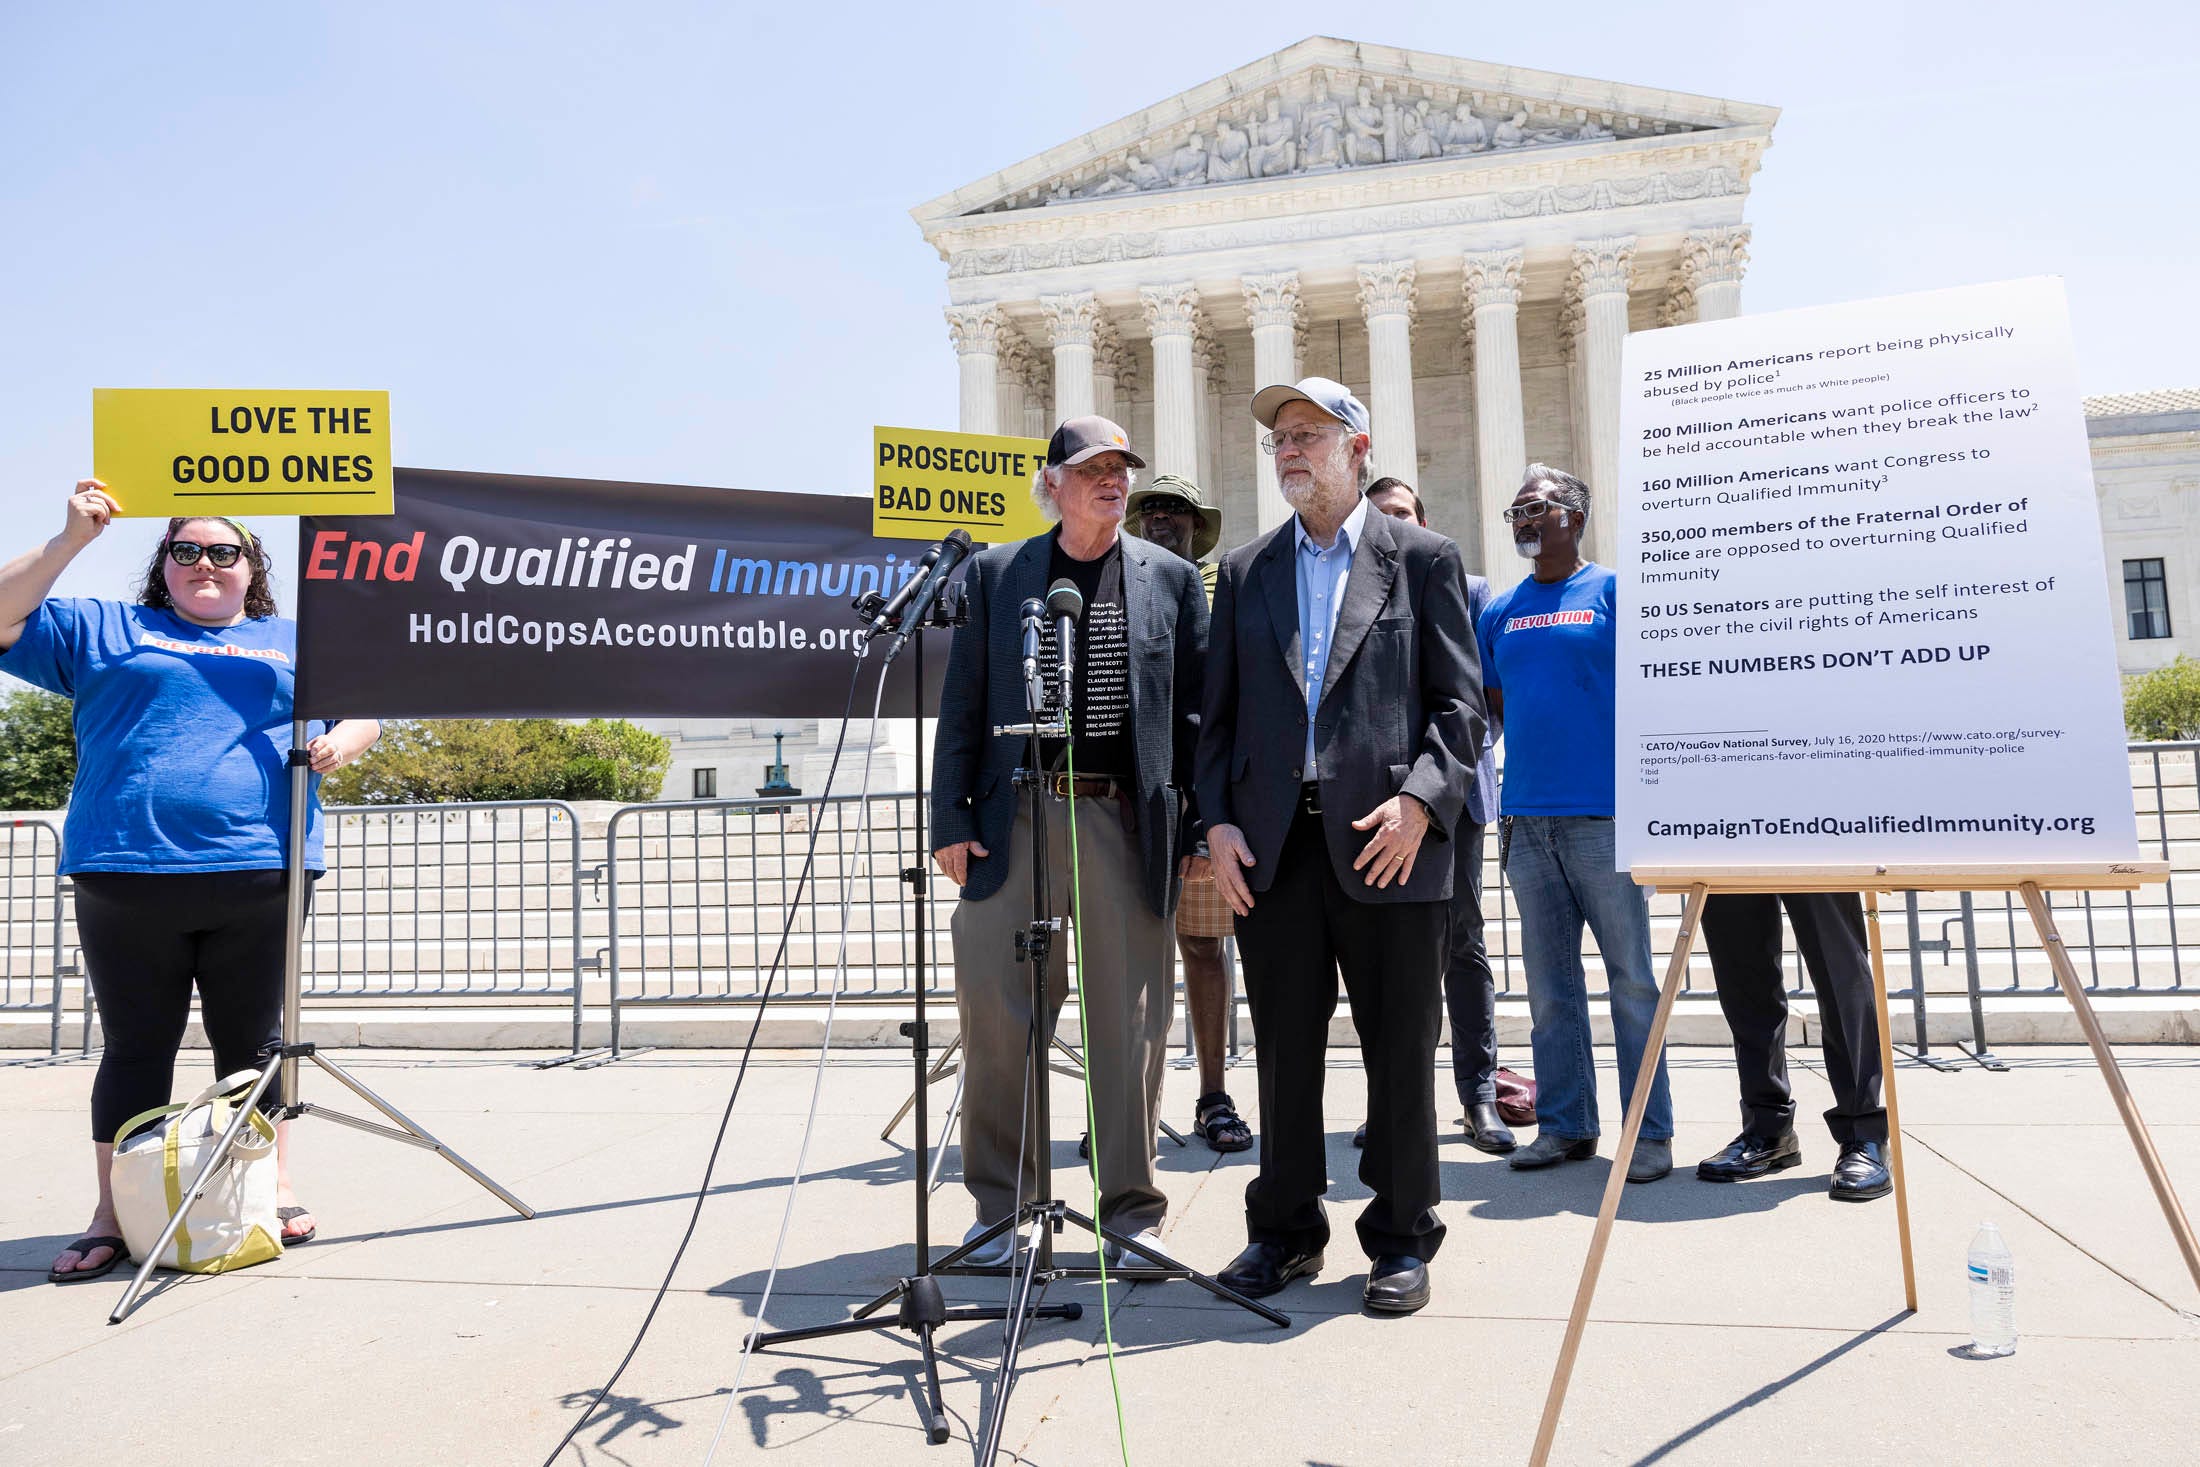 Ben Cohen and Jerry Greenfield, founders of Ben and Jerry's Ice Cream, are among those who have called for an overhaul in policing in the United States.